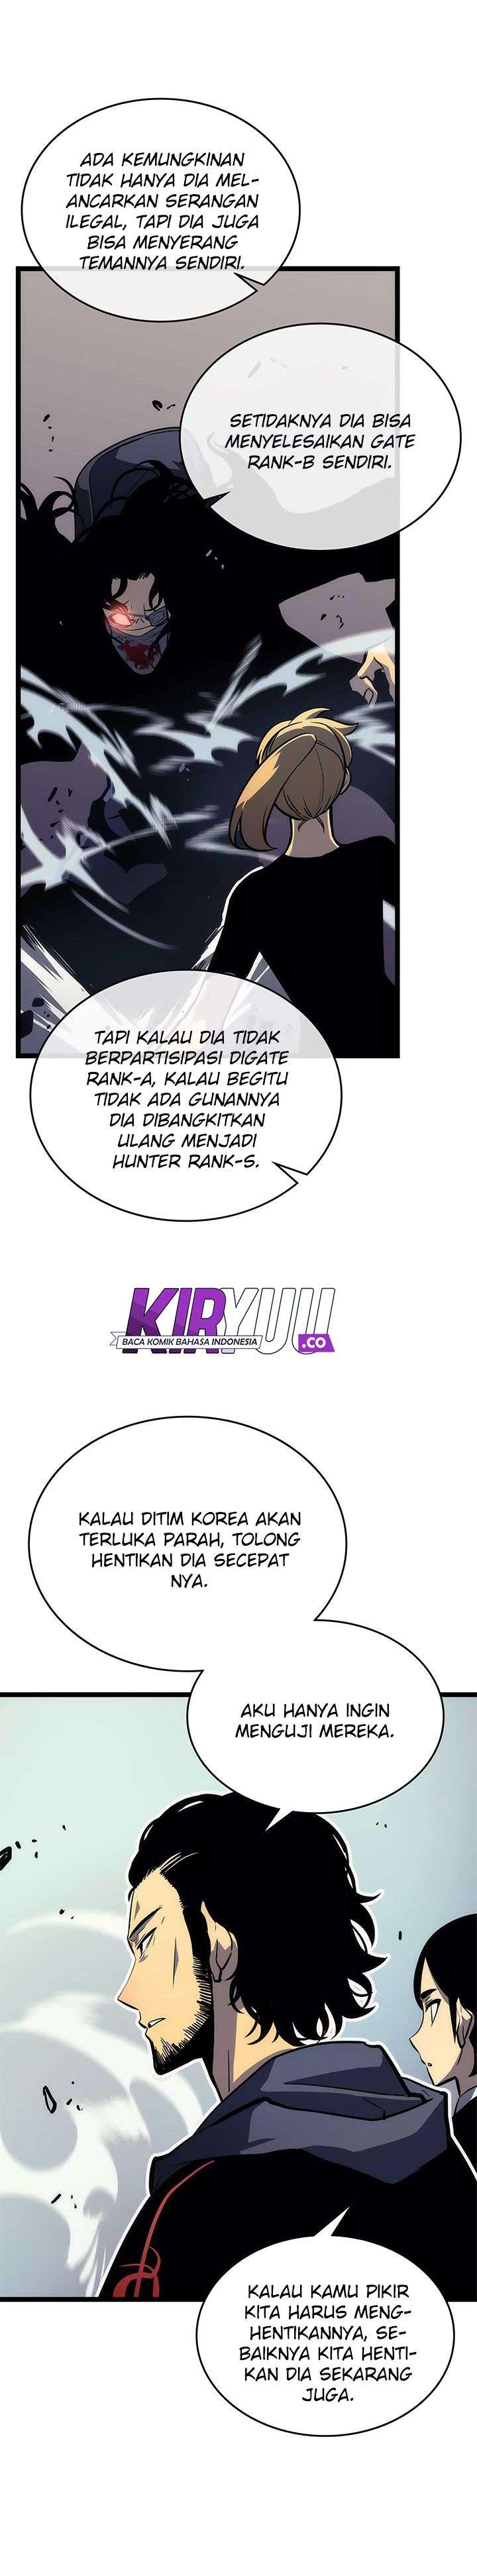 Solo Leveling Chapter 92 Image 23